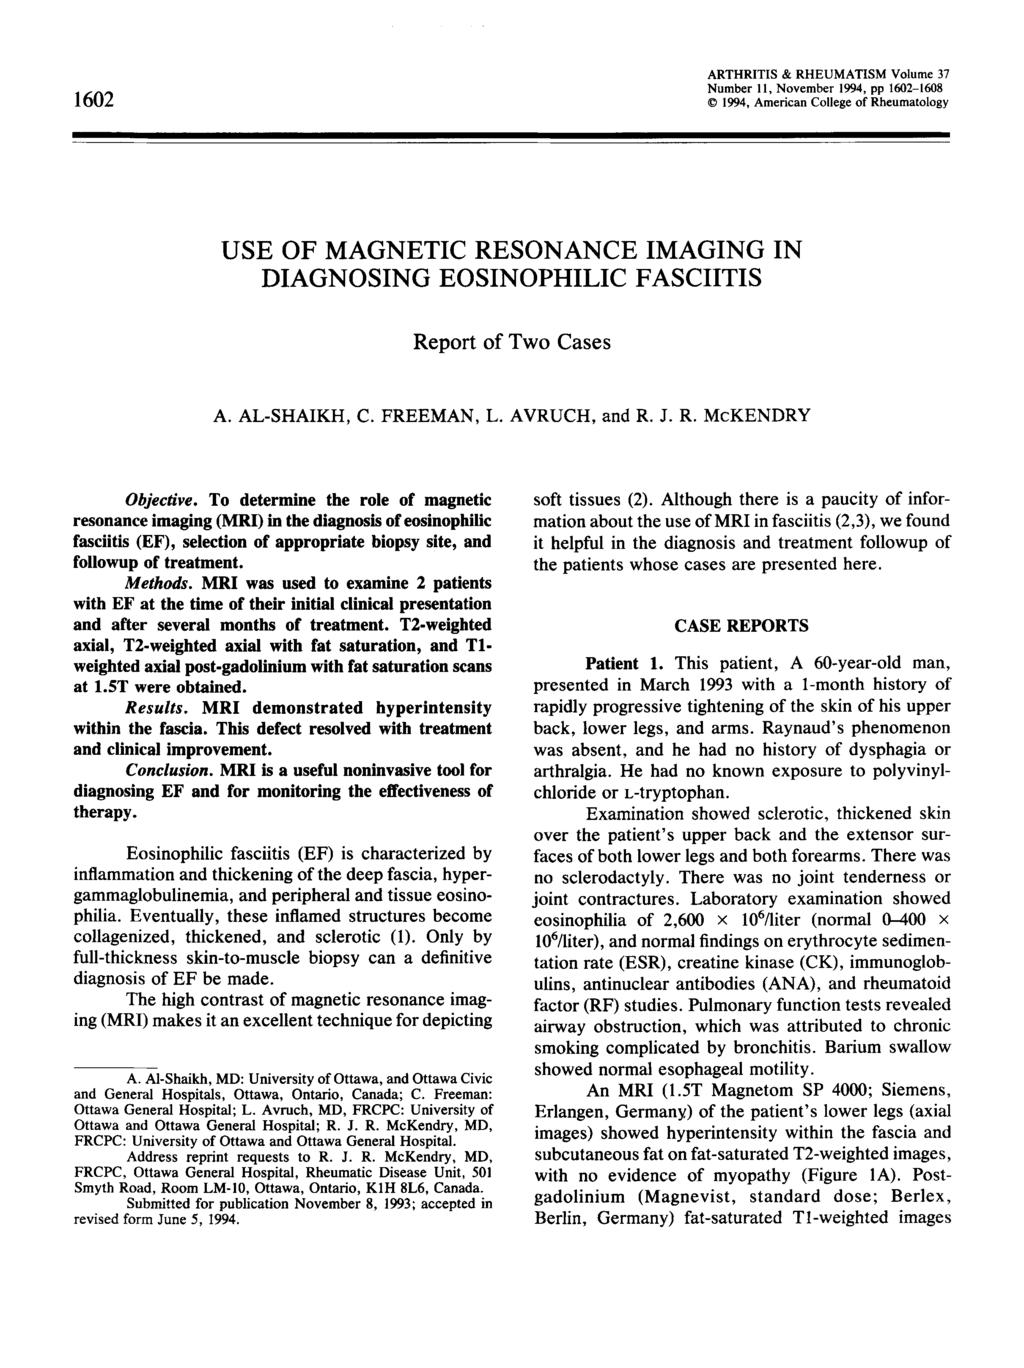 1602 RTHRITIS & RHEUMTISM Volume 37 Number 11, November 1994, pp 1602-1608 8 1994, merican College of Rheumatology USE OF MGNETIC RESONNCE IMGING IN DIGNOSING EOSINOPHILIC FSCIITIS Report of Two